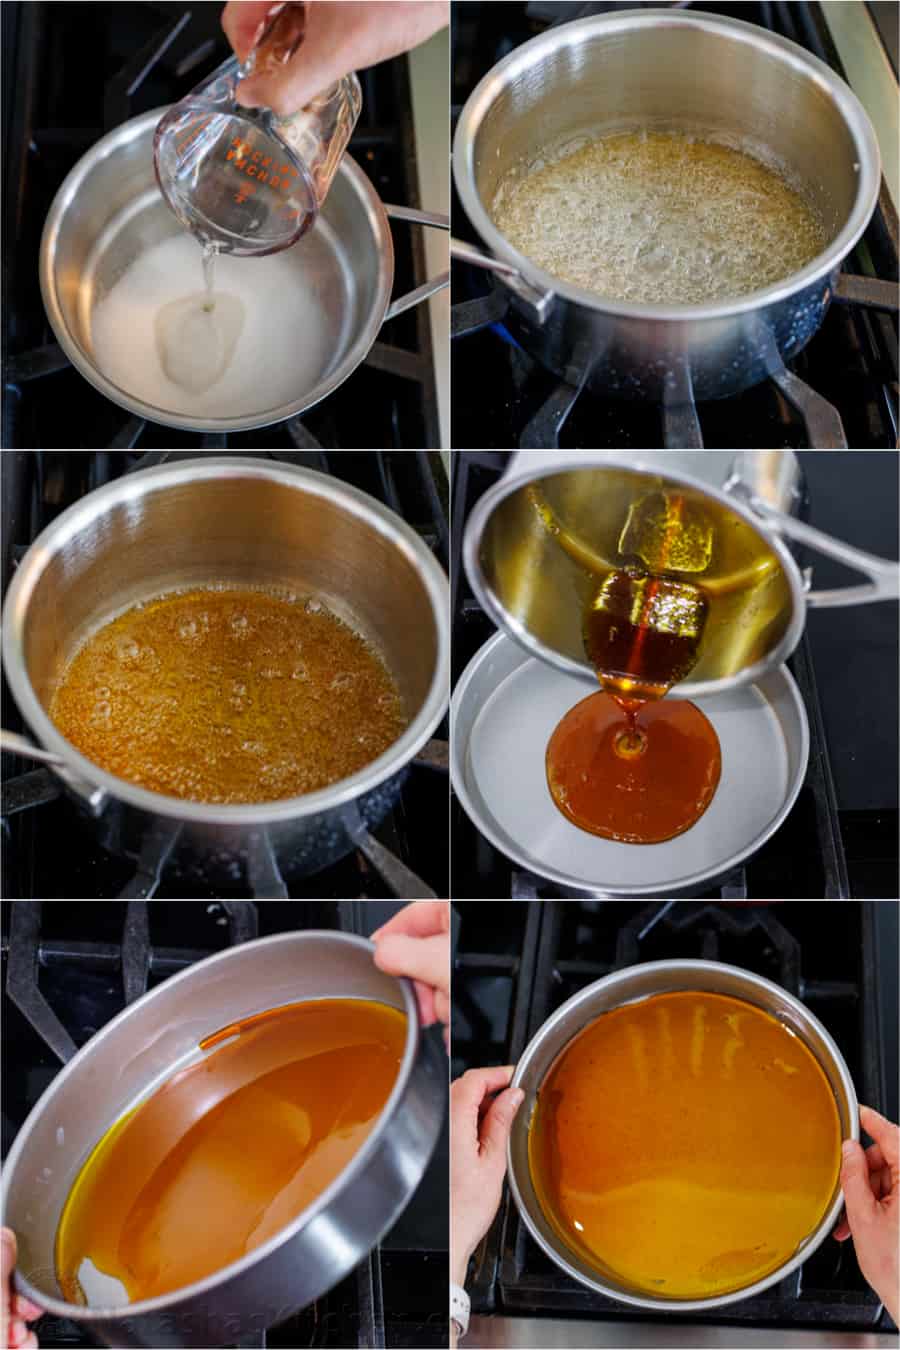 Step by step guide on making caramel sauce for flan